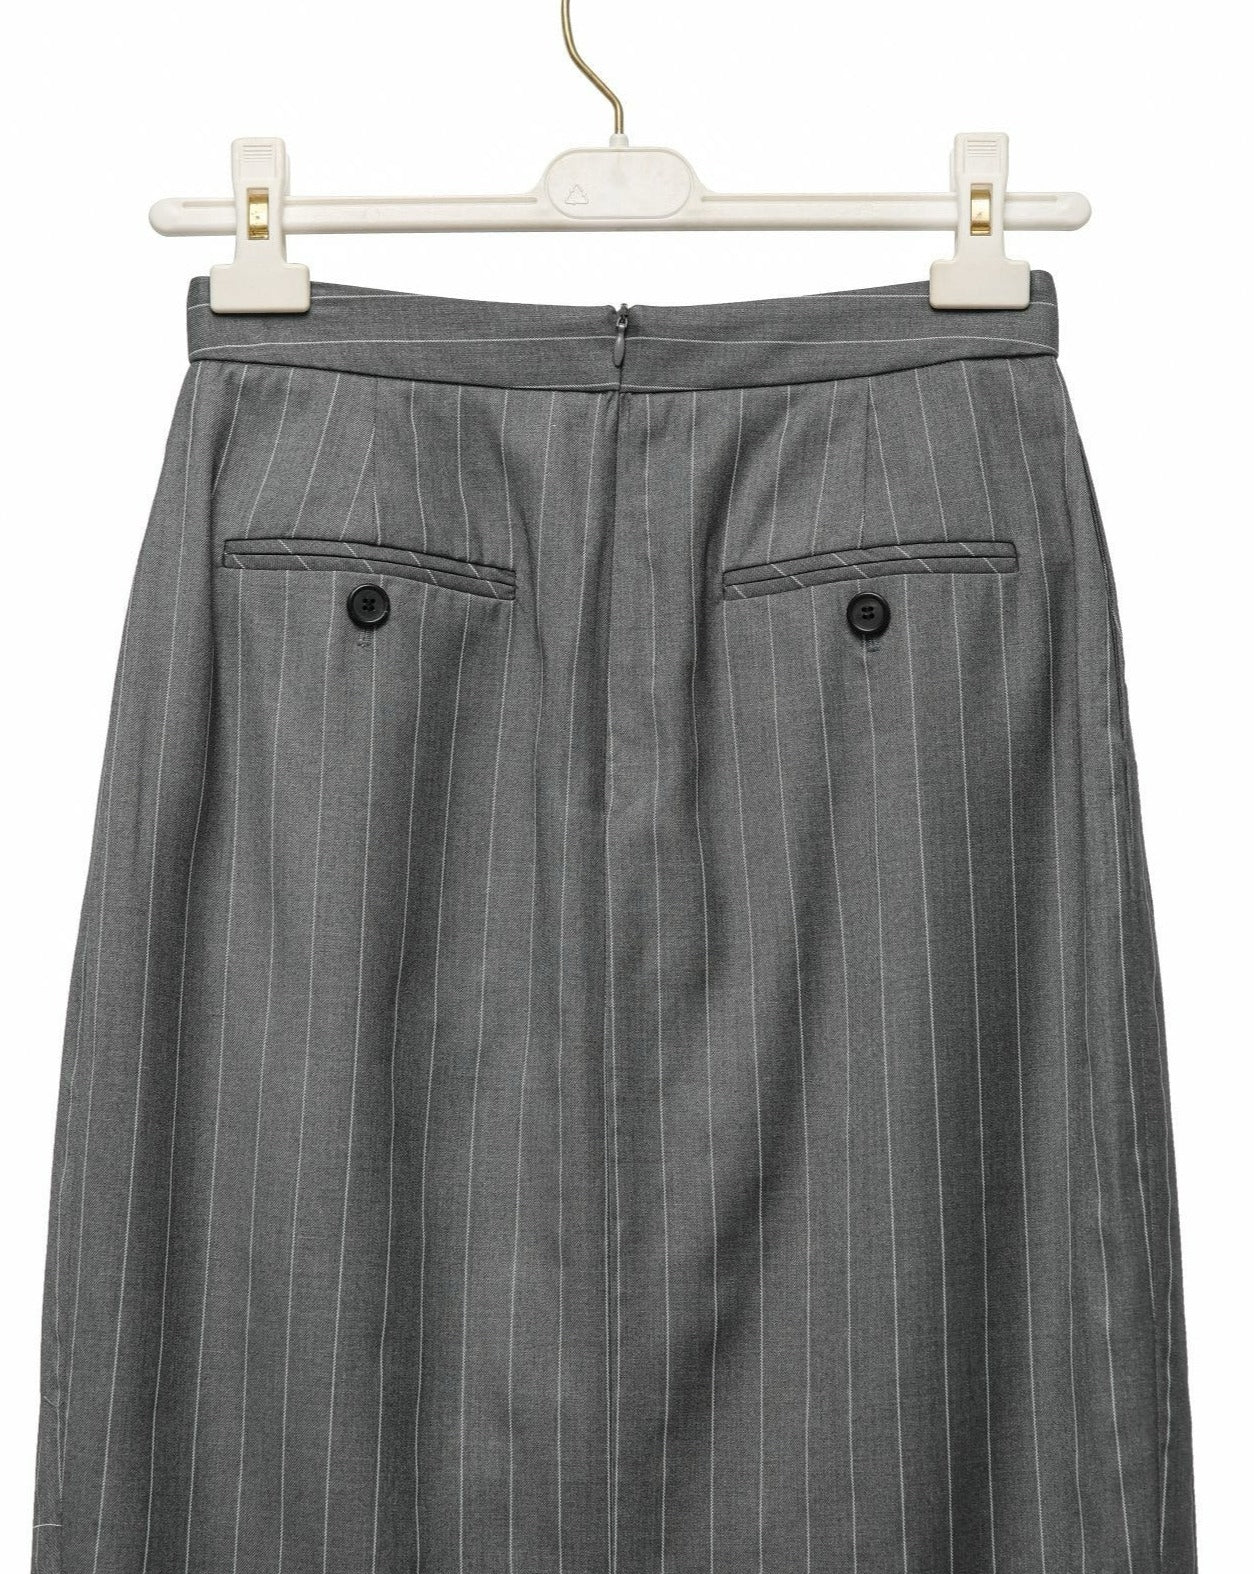 [PAPERMOON] SS / Wide Pin Stripe Set Up Suit Pencil Midi Skirt